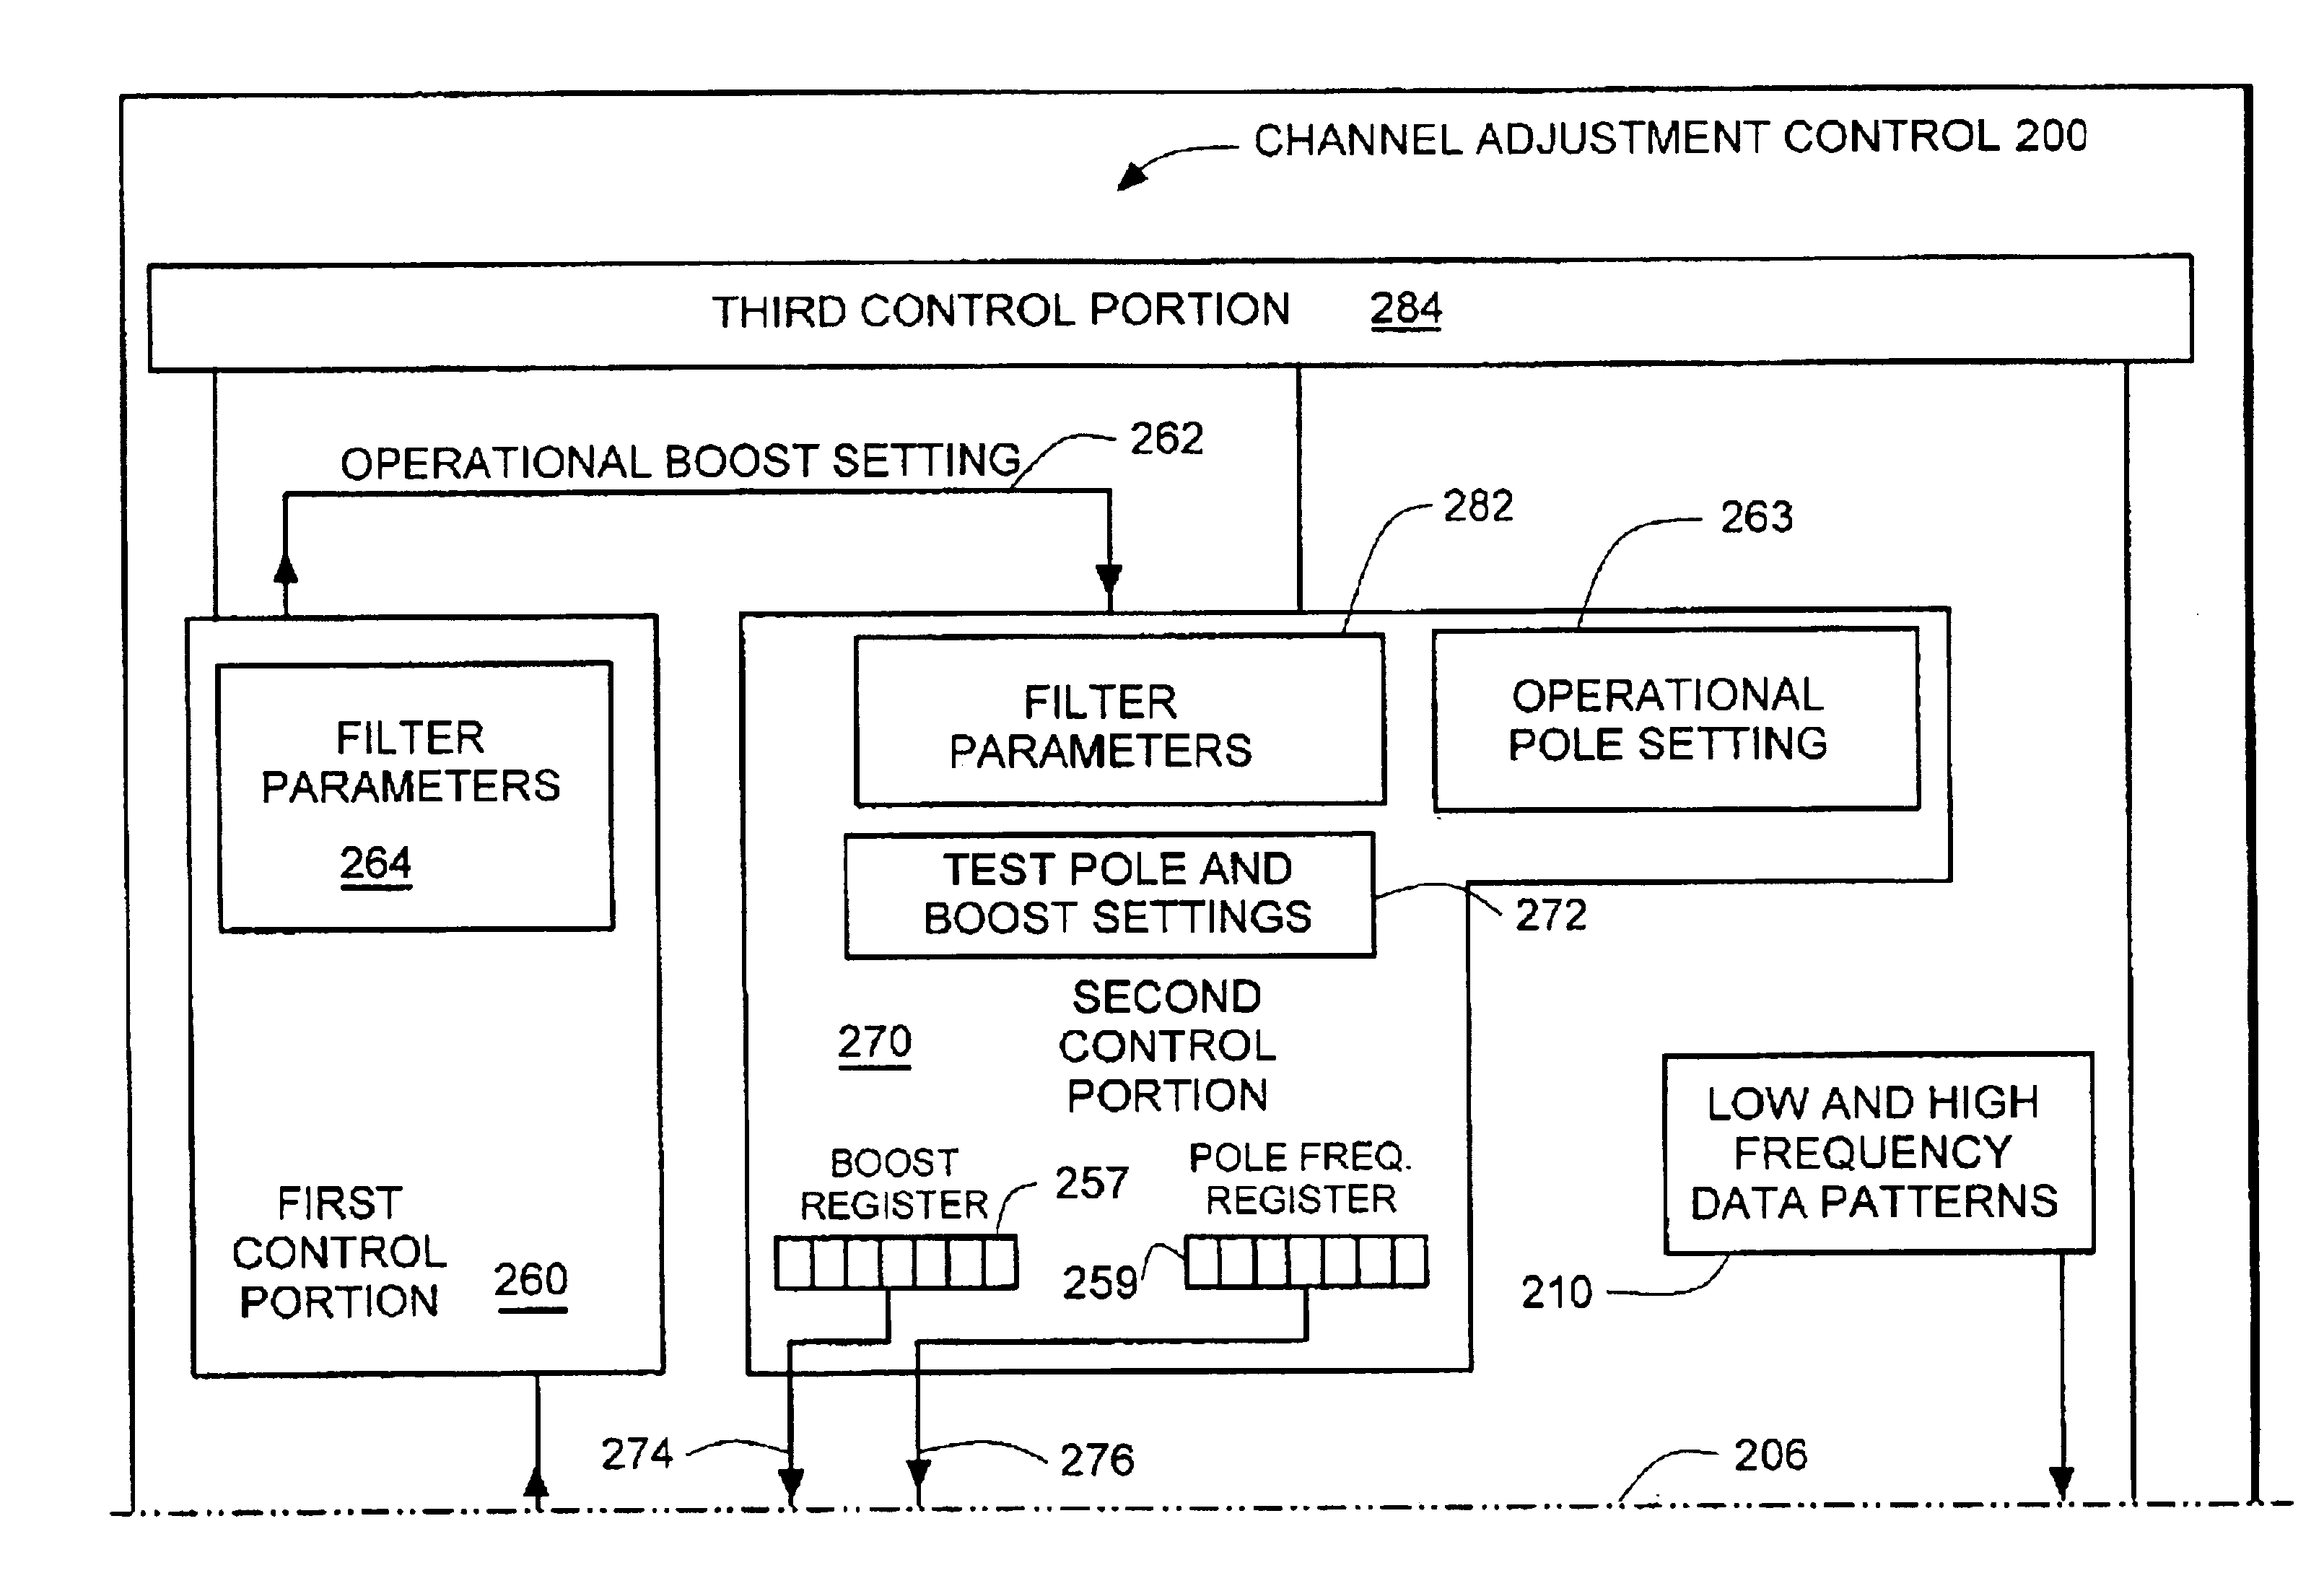 Adjustment of pole frequency and boost settings of a filter in a channel